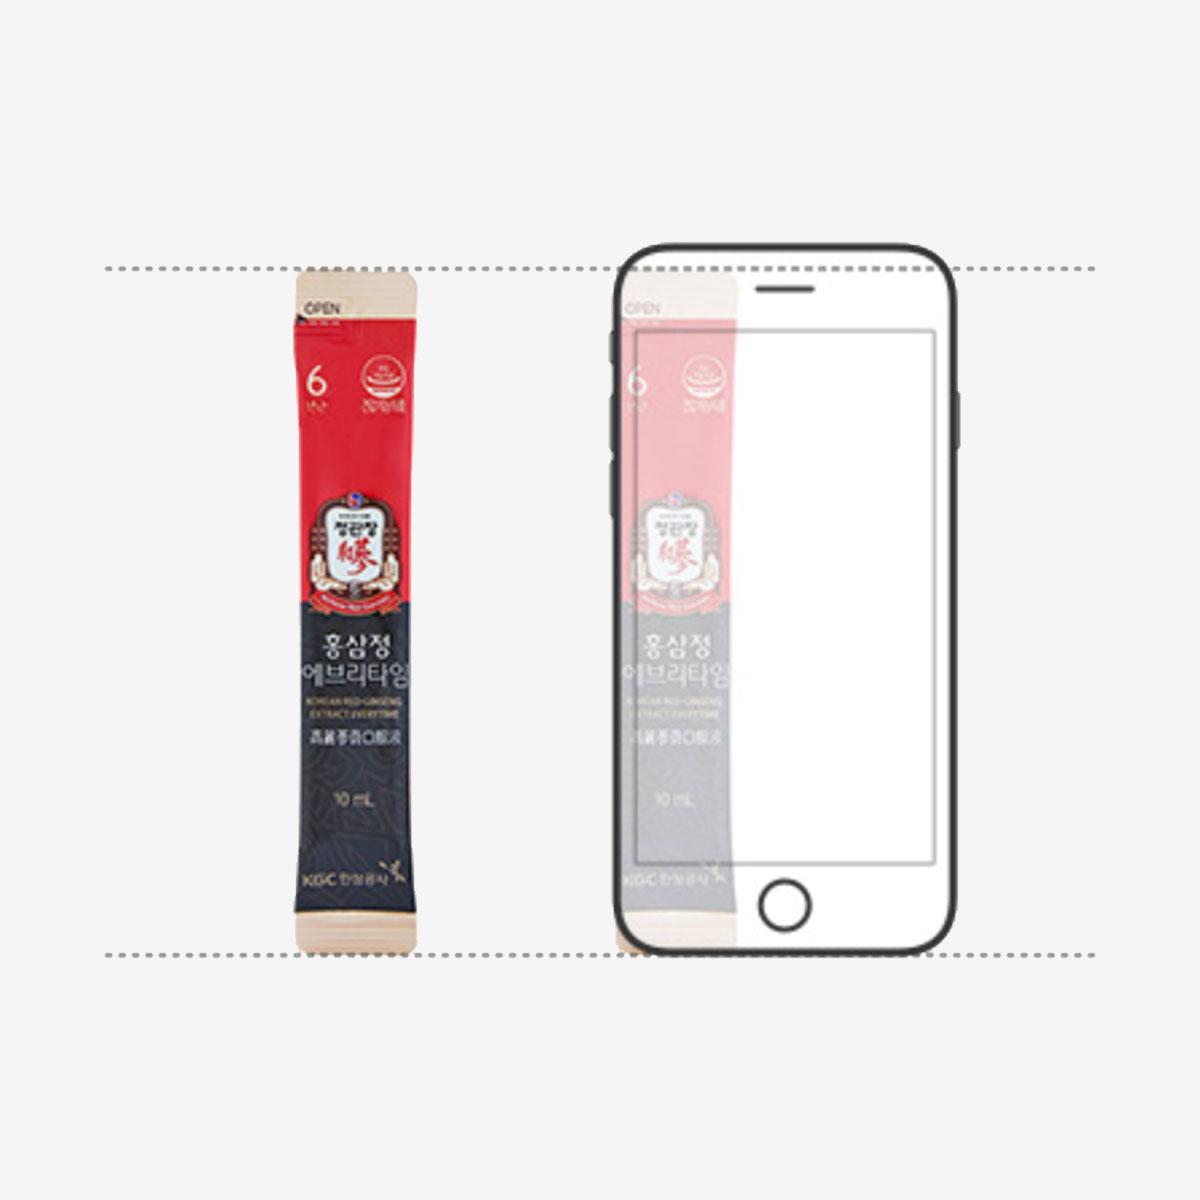 korean brand cheong kwan jang red ginseng extract everytime stick length compared to iphone